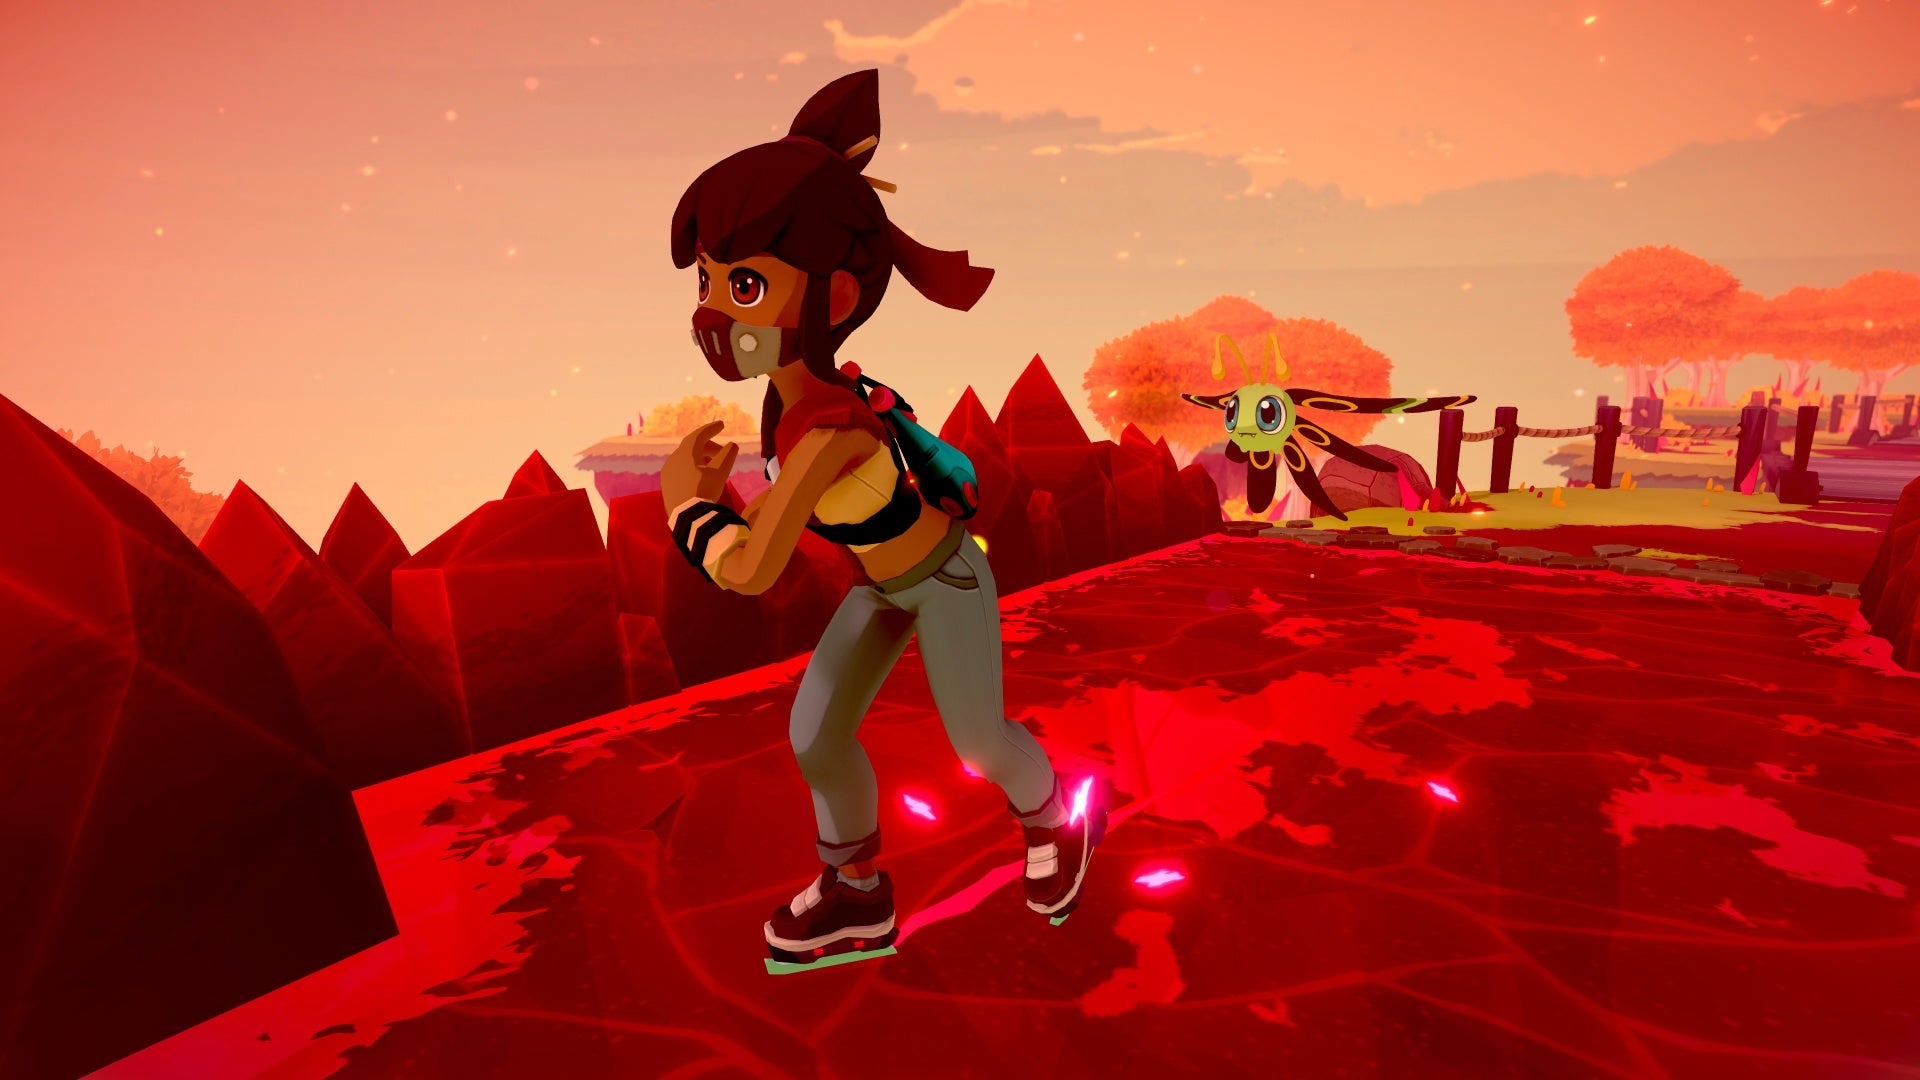 Image for Temtem, a Pokémon-like MMO, will leave early access this September